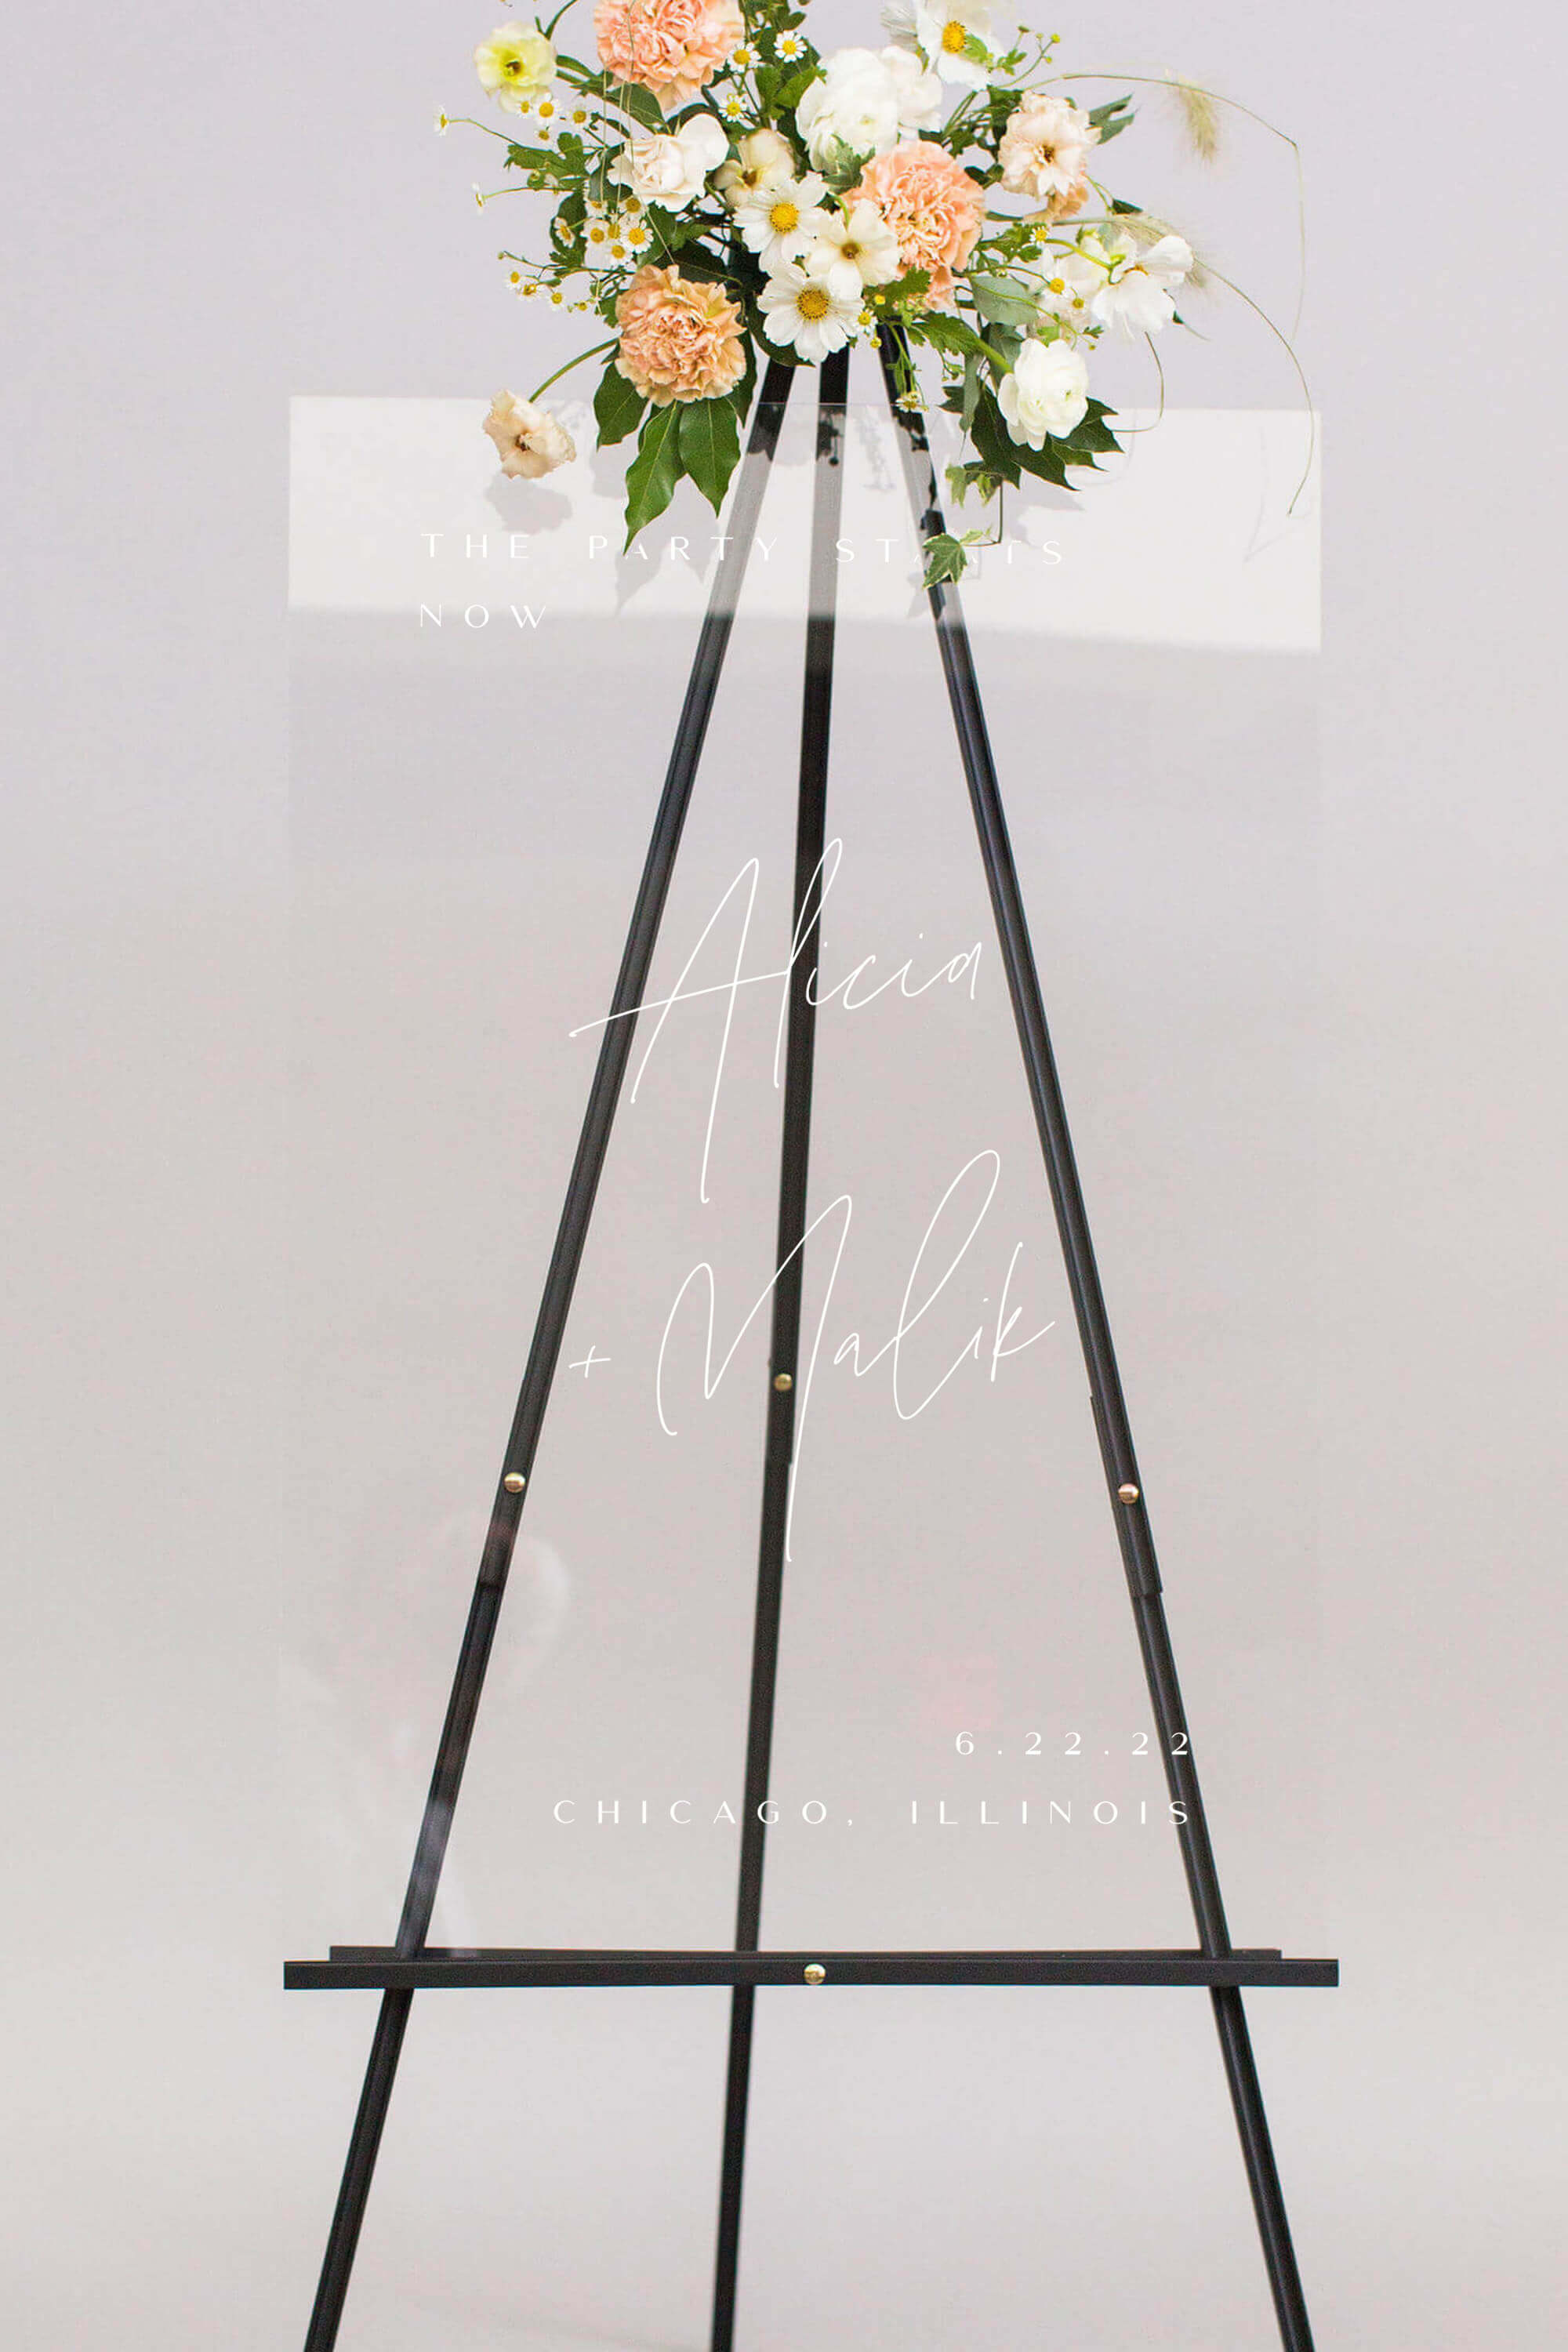 Acrylic Easels  Clear Displays for Art and Signage